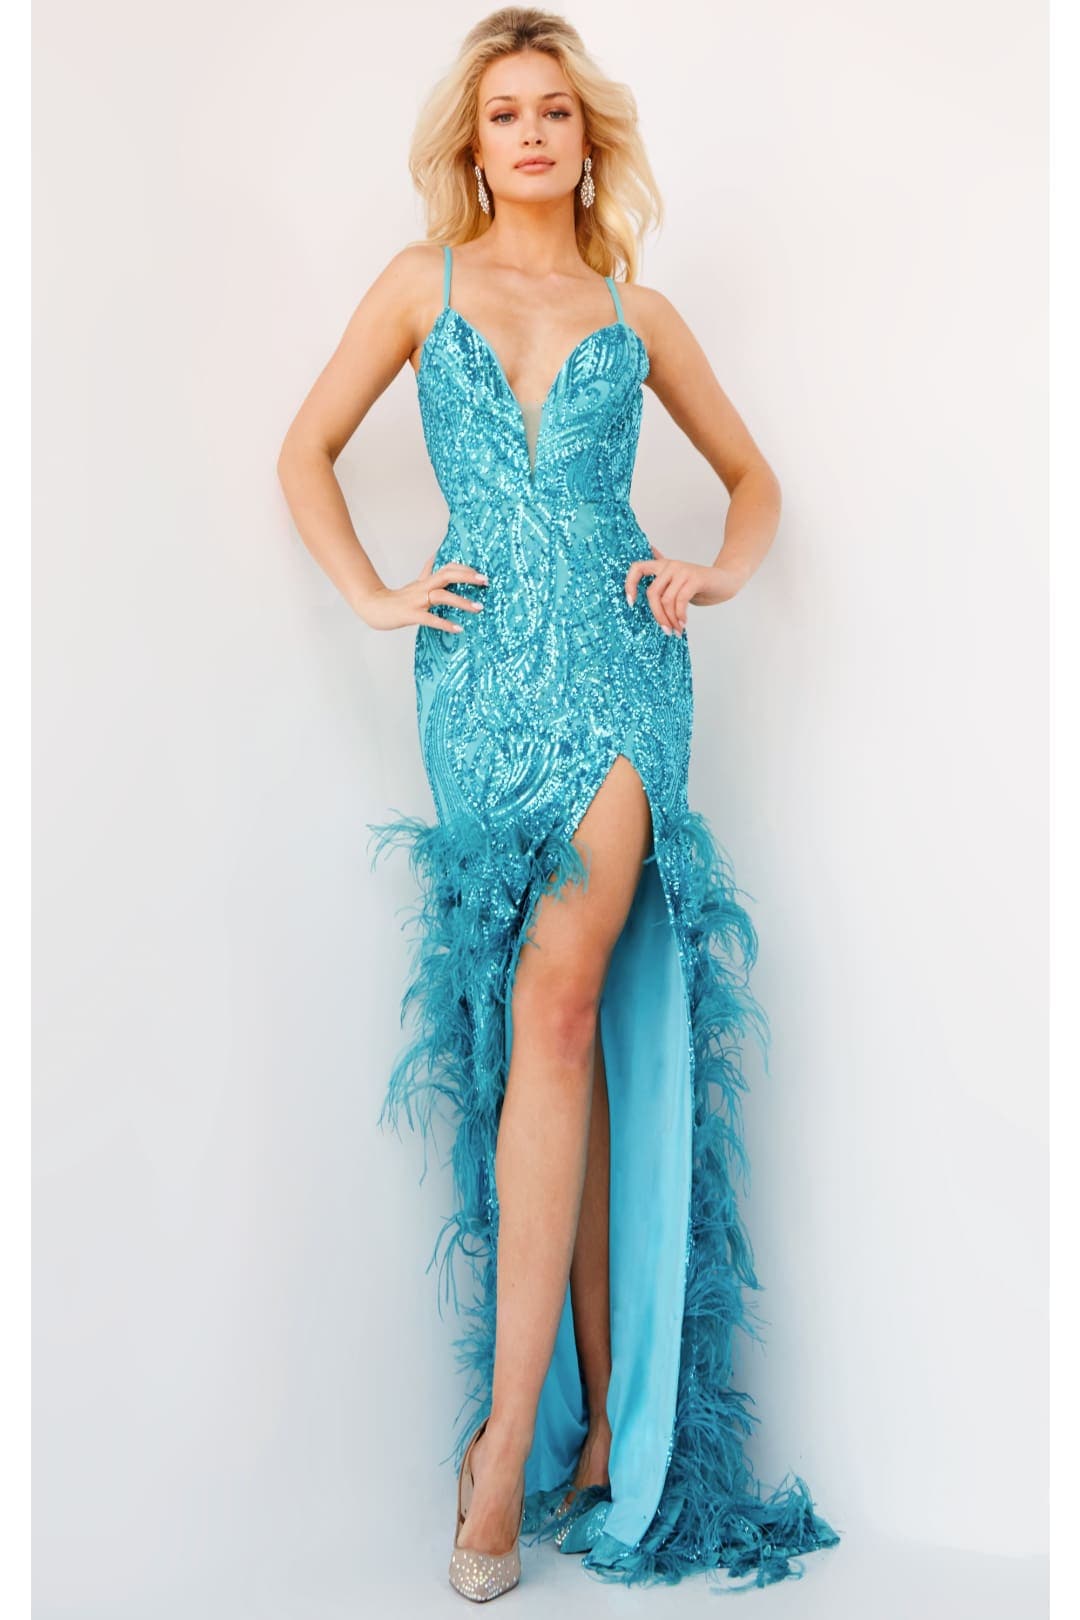 Jovani 08340 Spaghetti Strap Sequin Feather Red Carpet Evening Dress - TURQUOISE / 00 - Dress